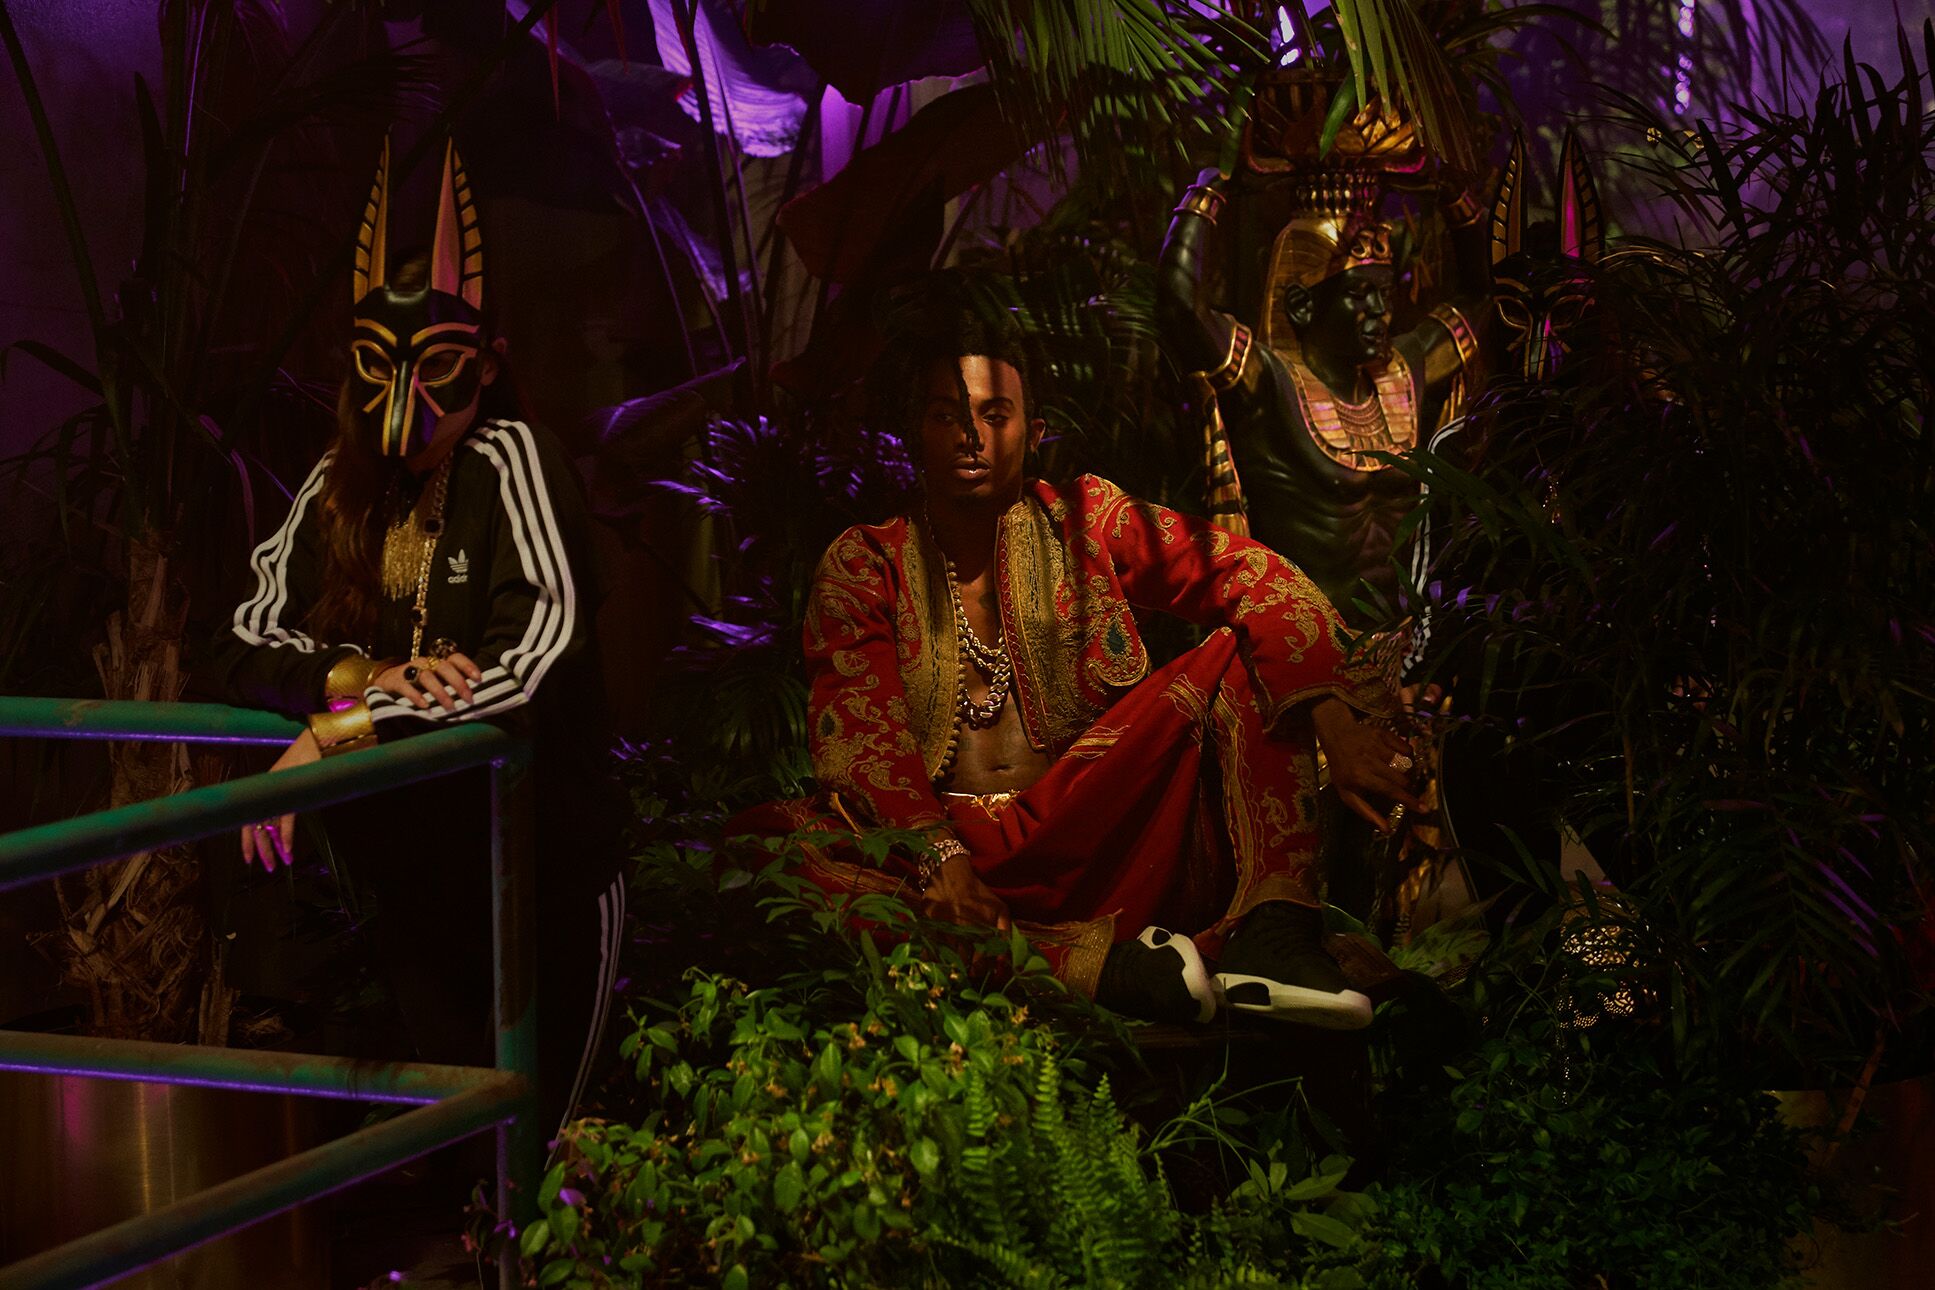 Playboi Carti, 21 Savage and Young Thug feature in adidas Original Is Never Finished film